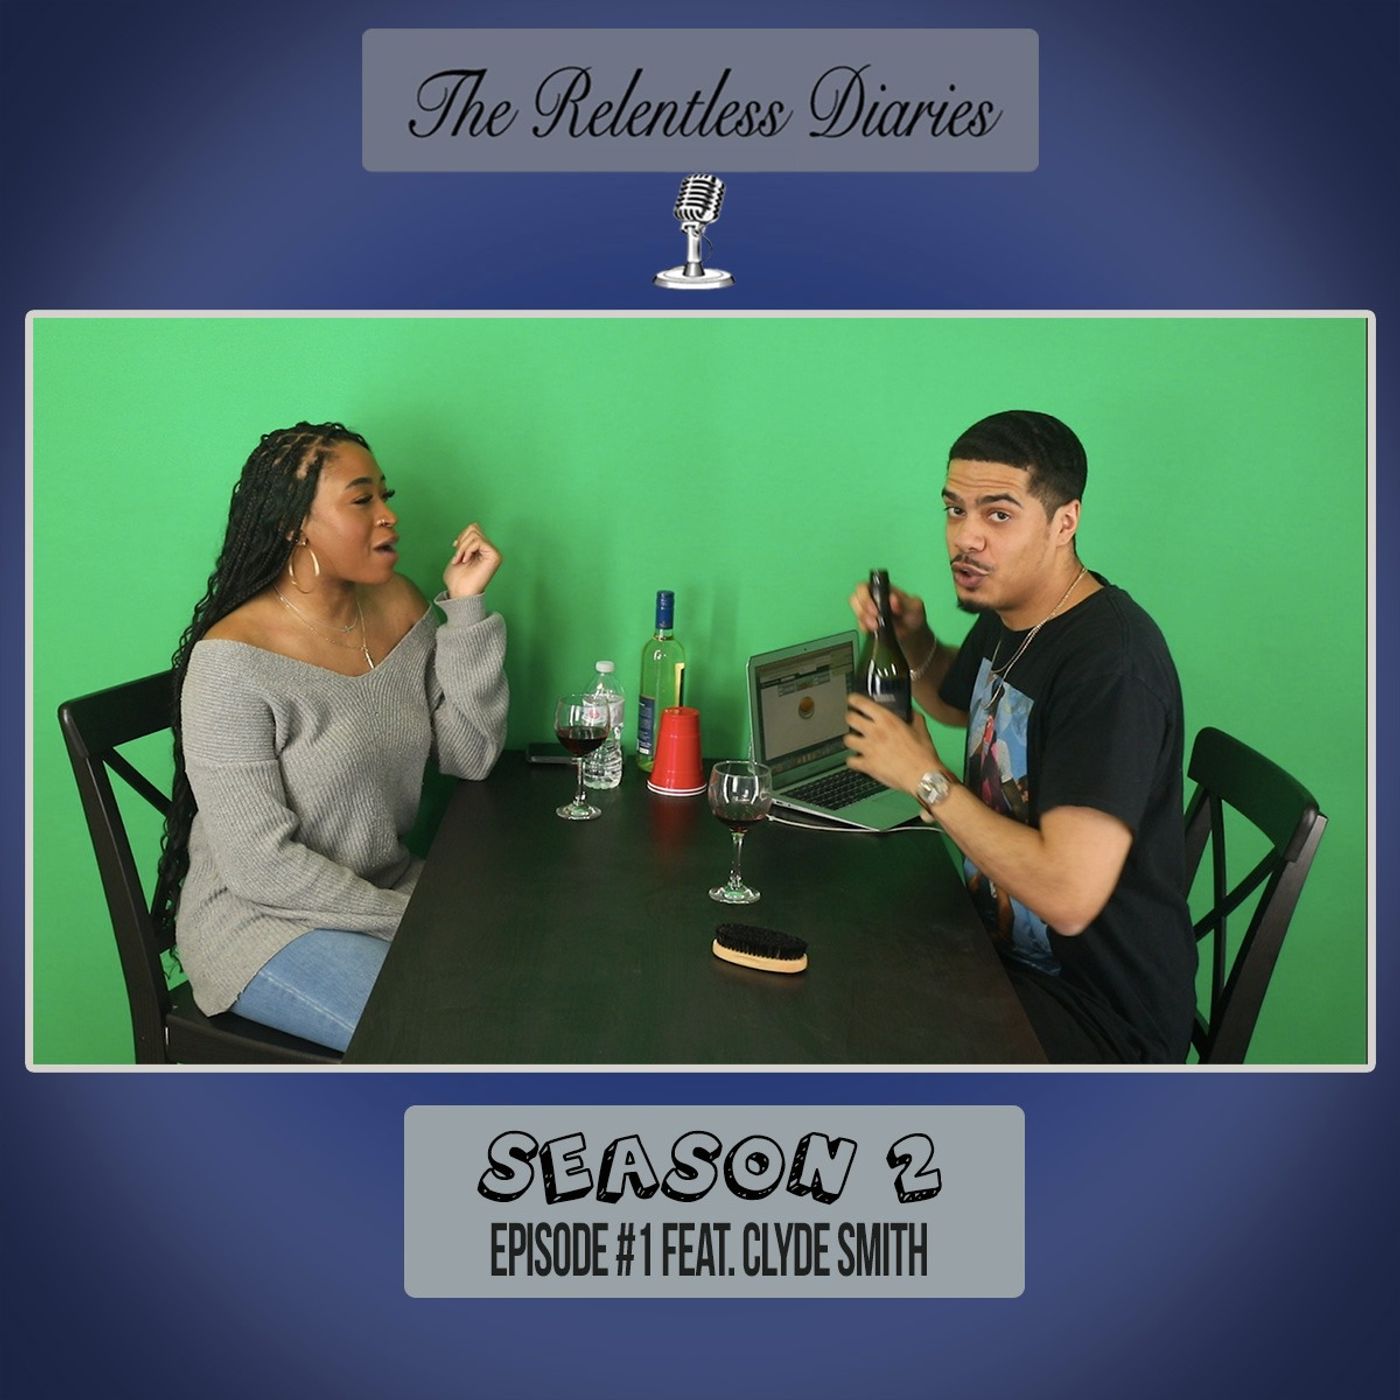 The Relentless Diaries Season 2 Episode 1  ”The Co-Host 1-On-1”